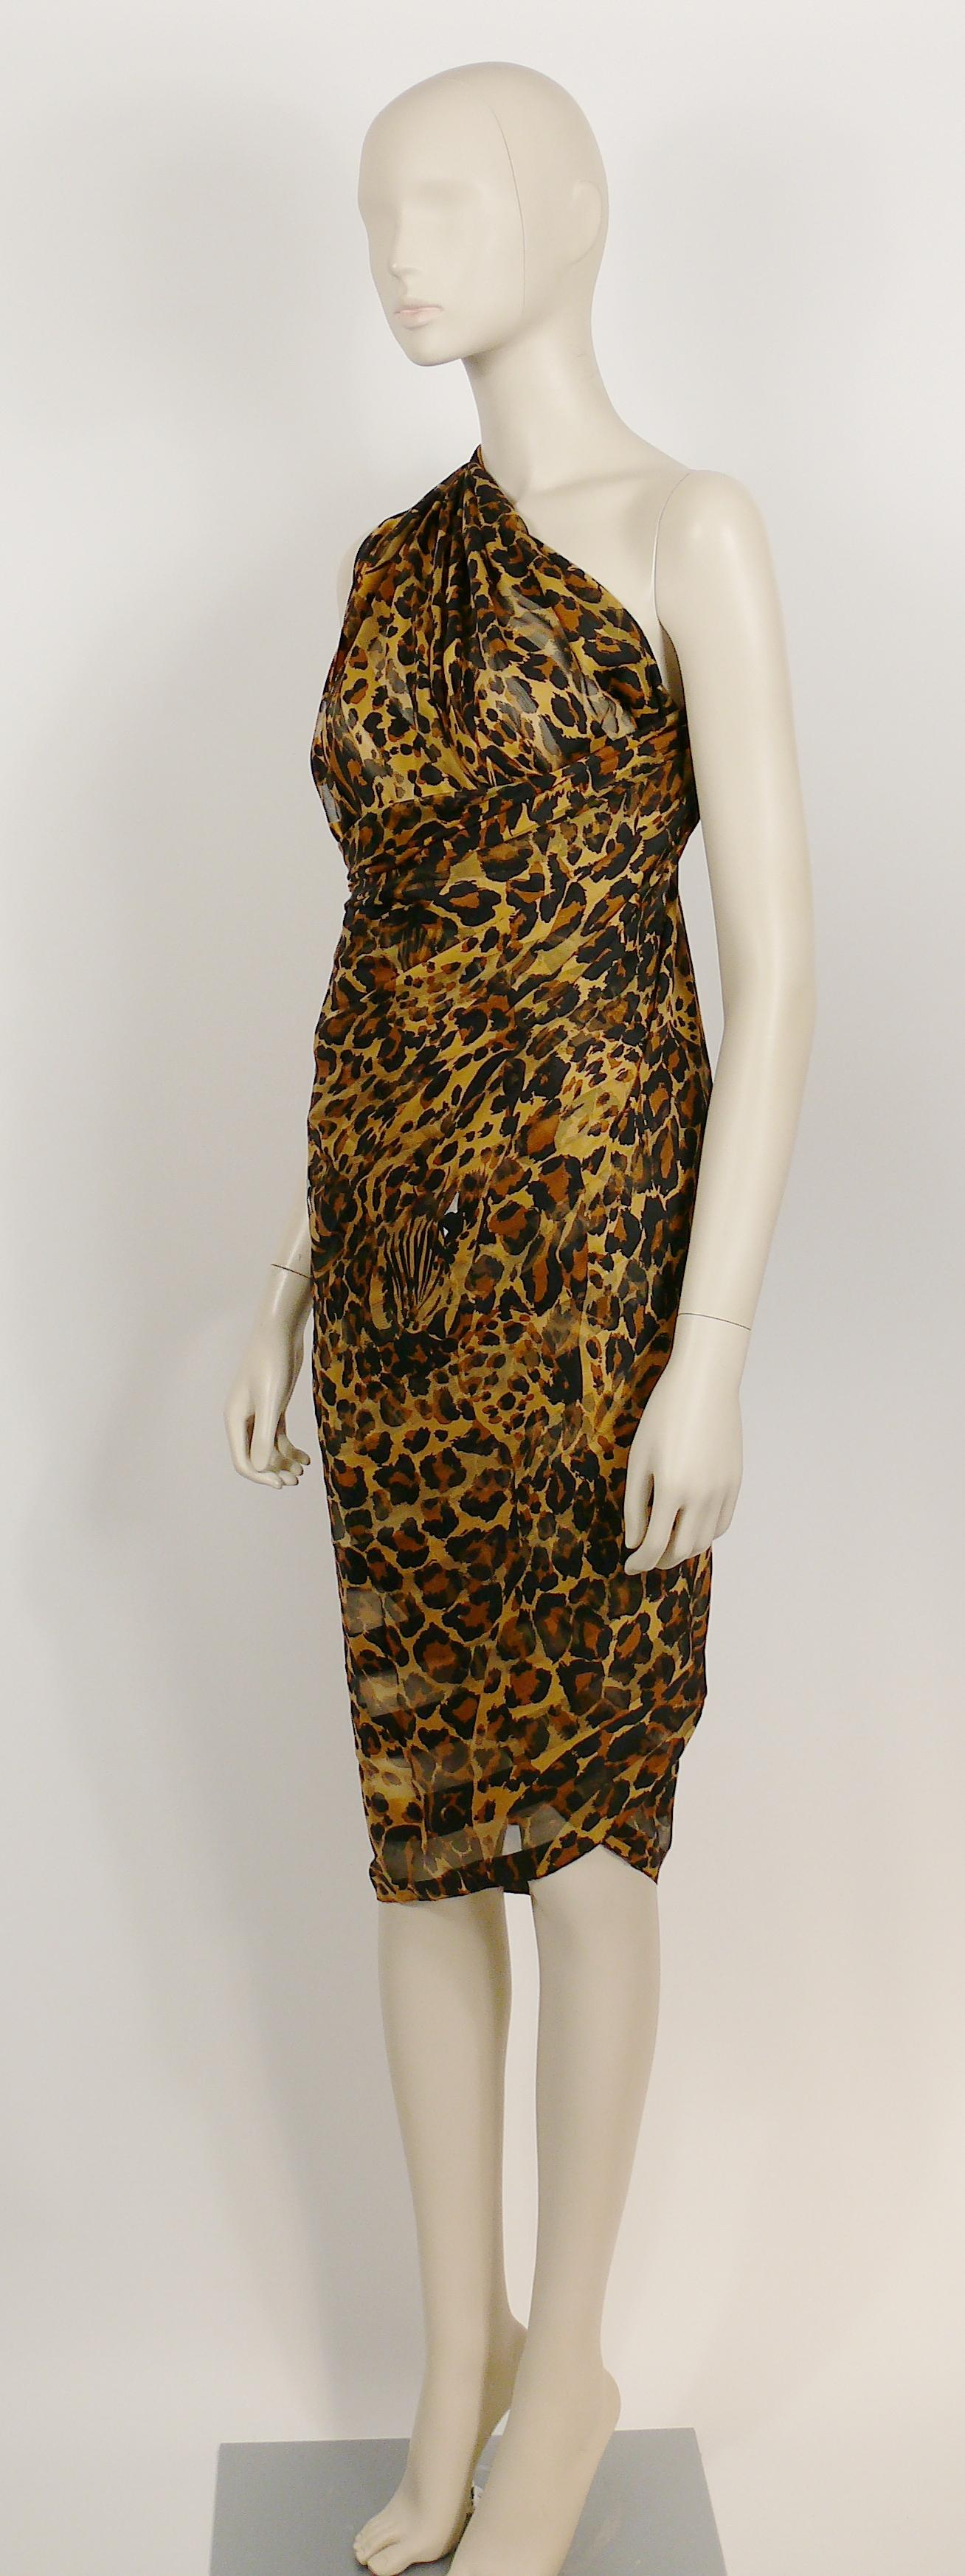 Yves Saint Laurent YSL Vintage Iconic Leopard Striped Sheer Print Stole For Sale 2